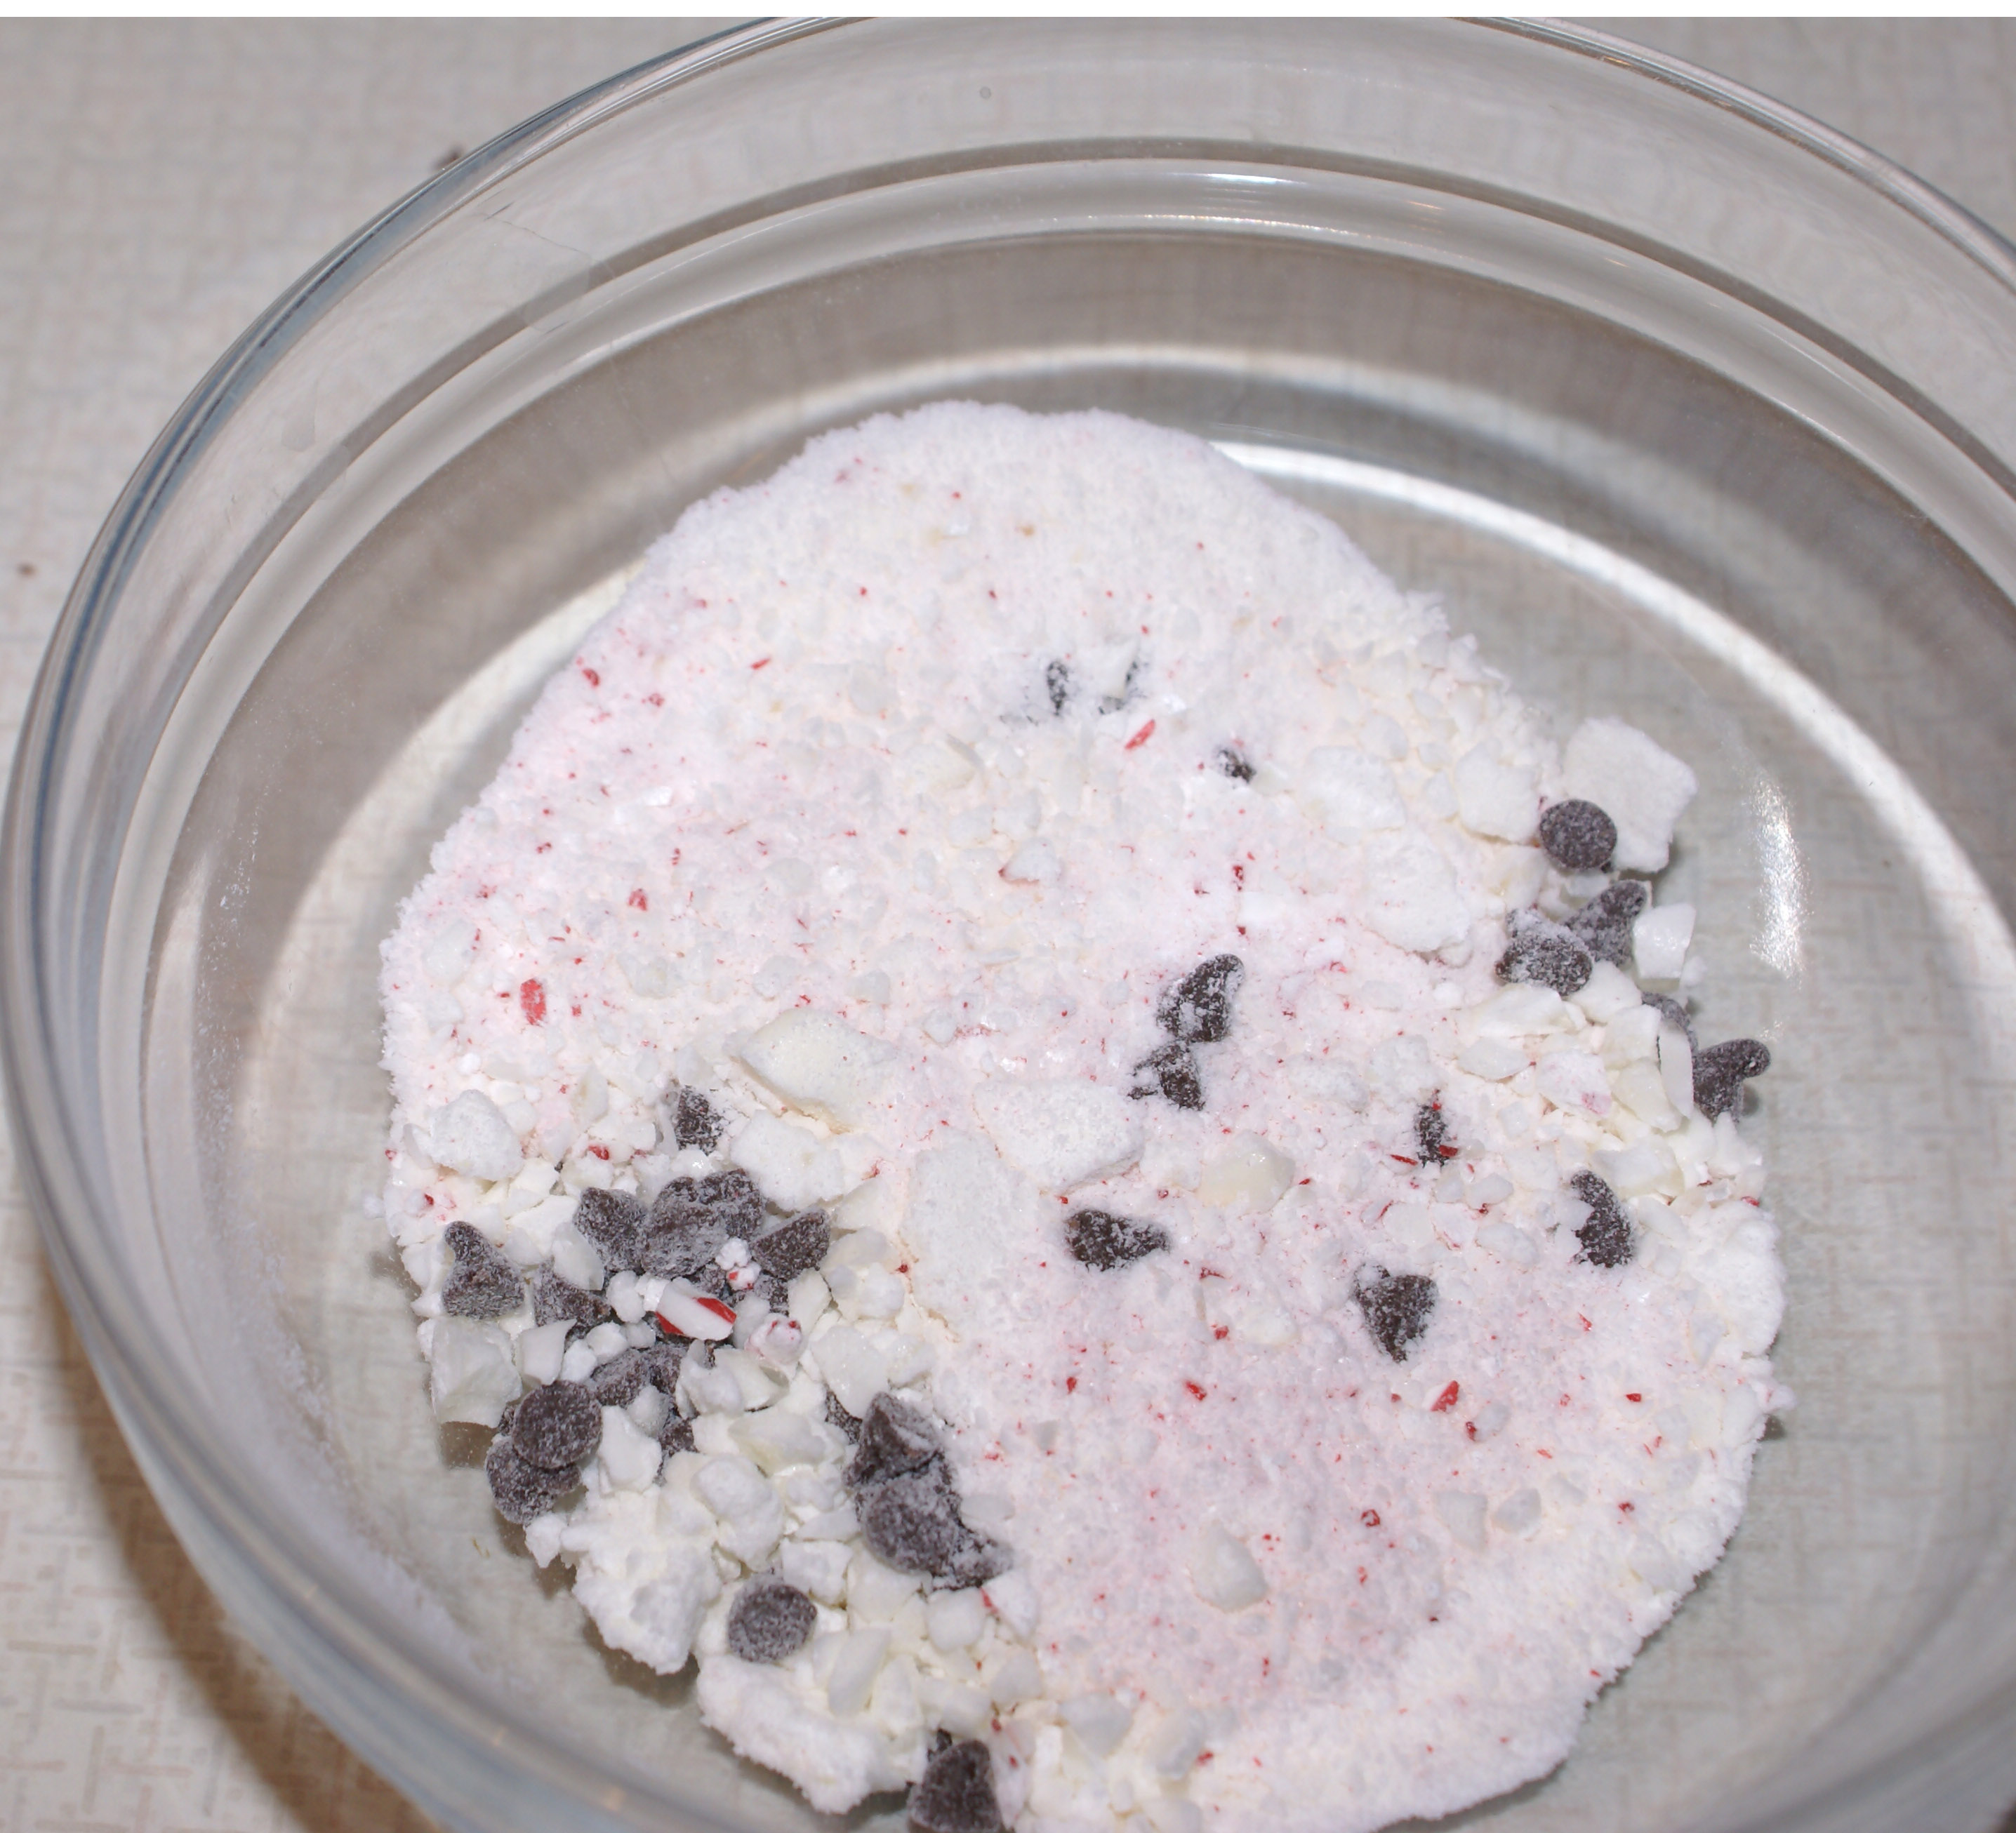 Crushed peppermint sticks and mini chocolate chips. Clear glass 2-cup bowl available at Lehman's in Kidron, Ohio.